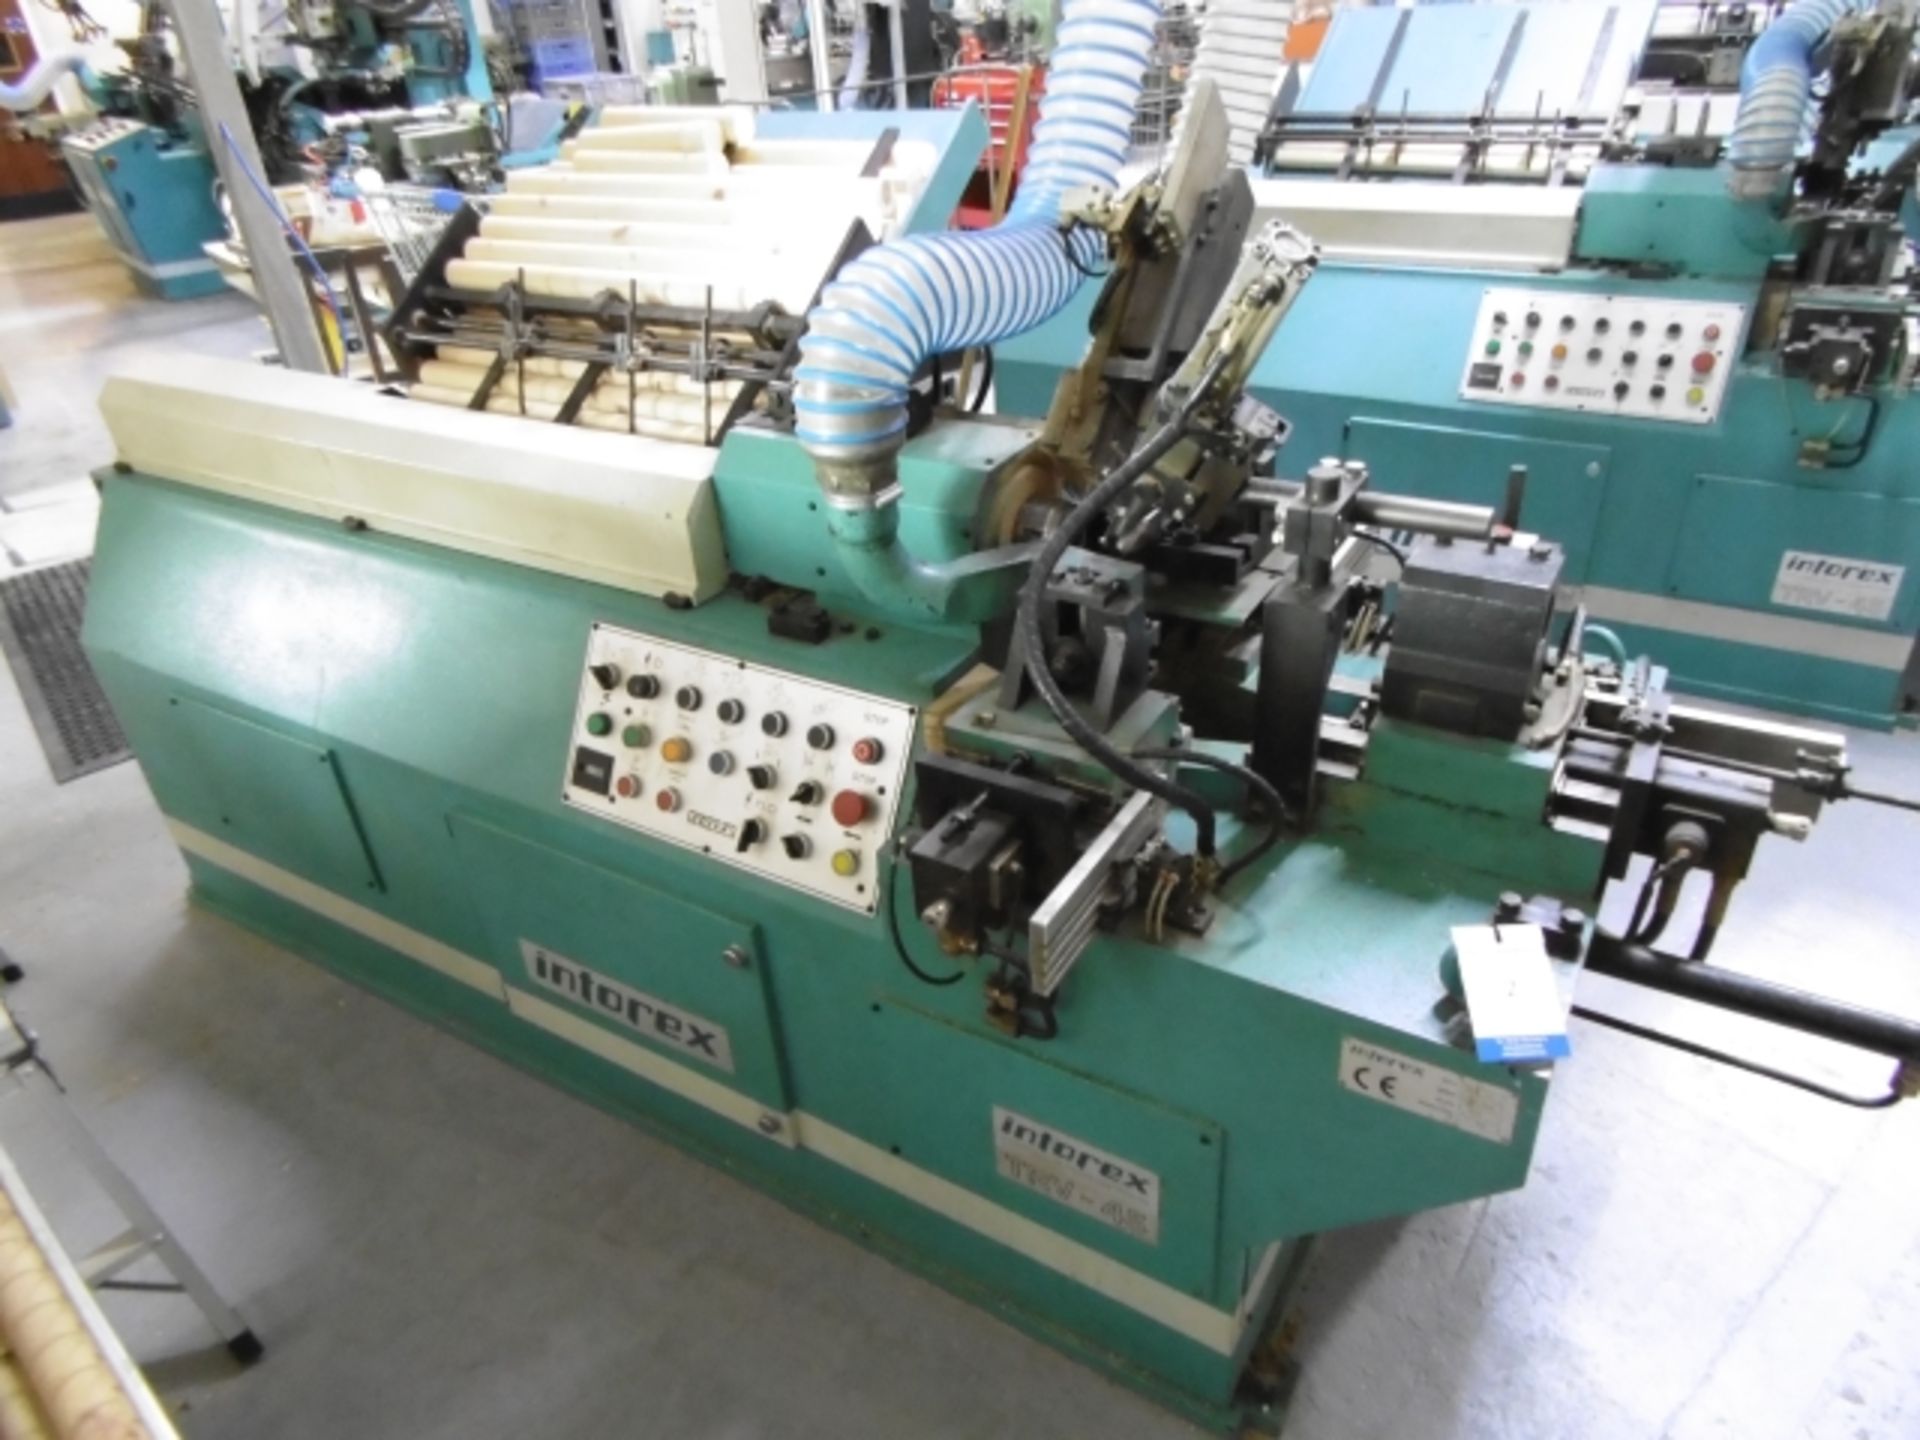 * 1997 Intorex TRV-45 Automatic Wood Turning Lathe. Serial No 201278. 2 knives, frontal tool and a - Image 2 of 11